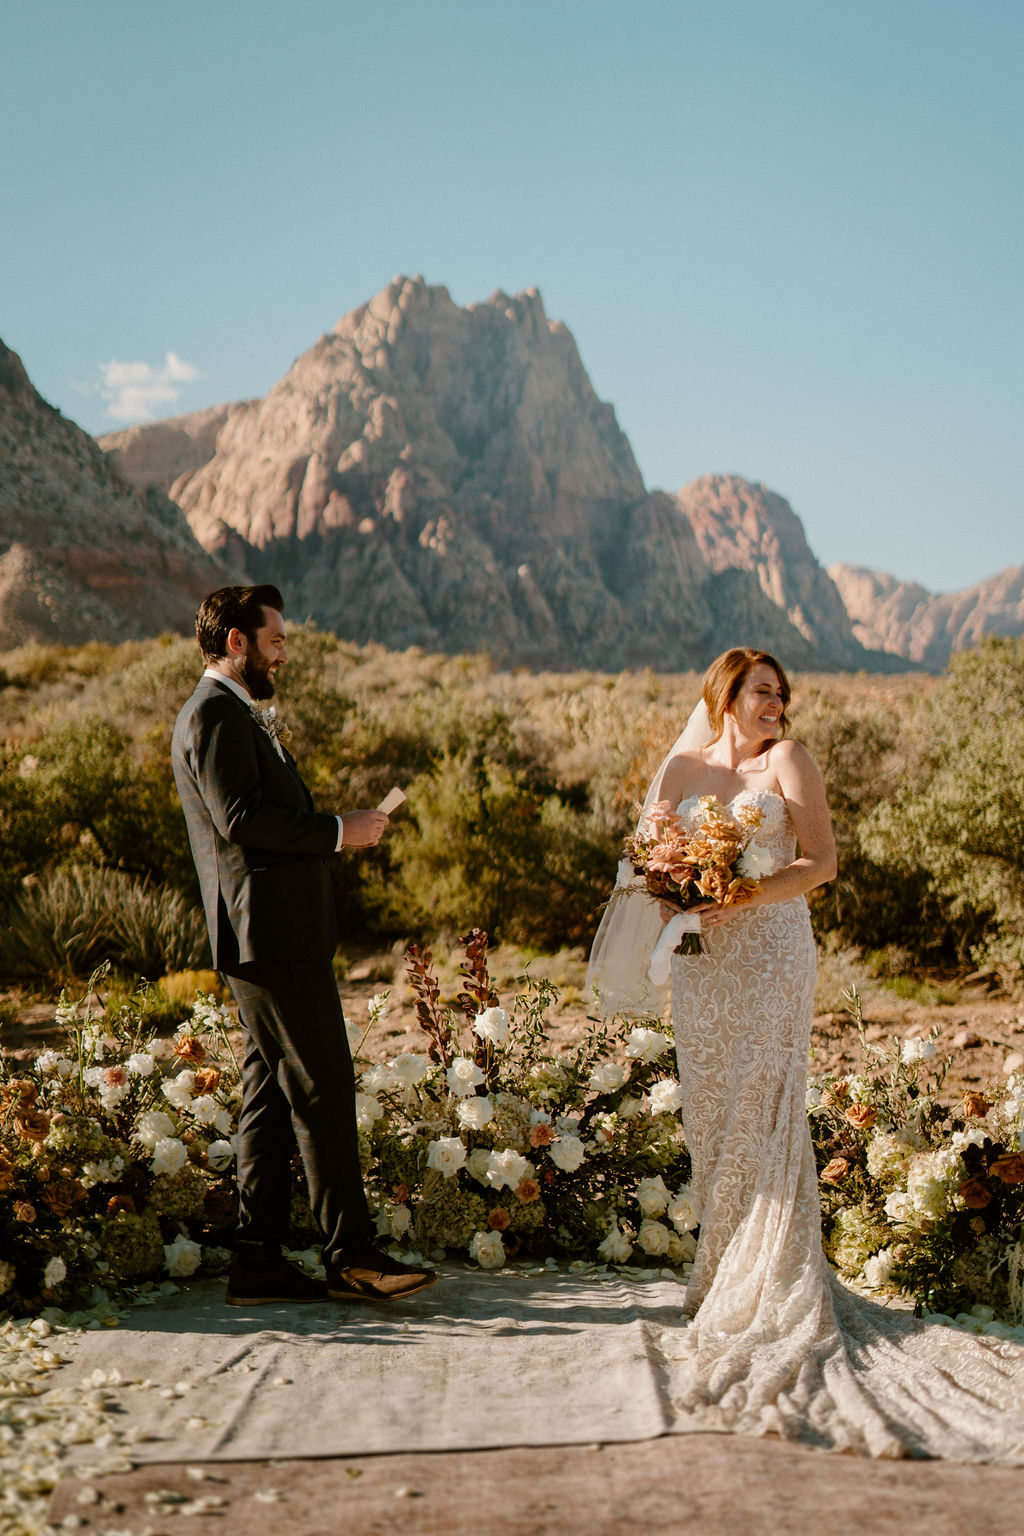 A wedding ceremony taking place outdoors, with a couple and officiant standing amid floral arrangements in a desert setting with a rugged mountain backdrop at Red Rock Canyon